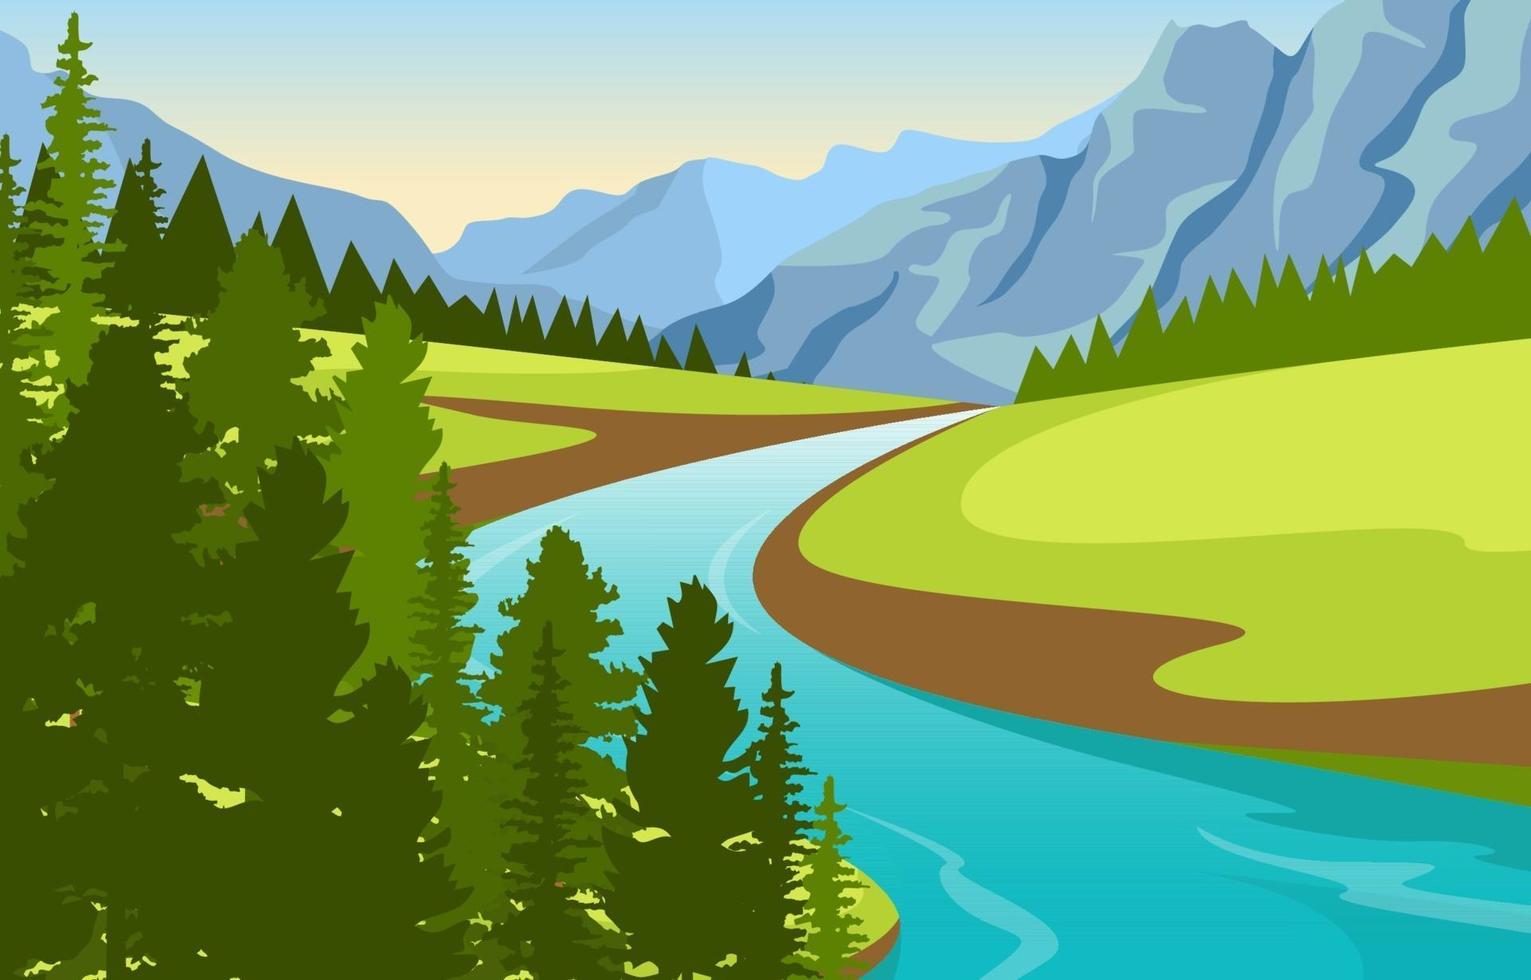 Nature Landscape with Winding River, Mountains, and Forest vector